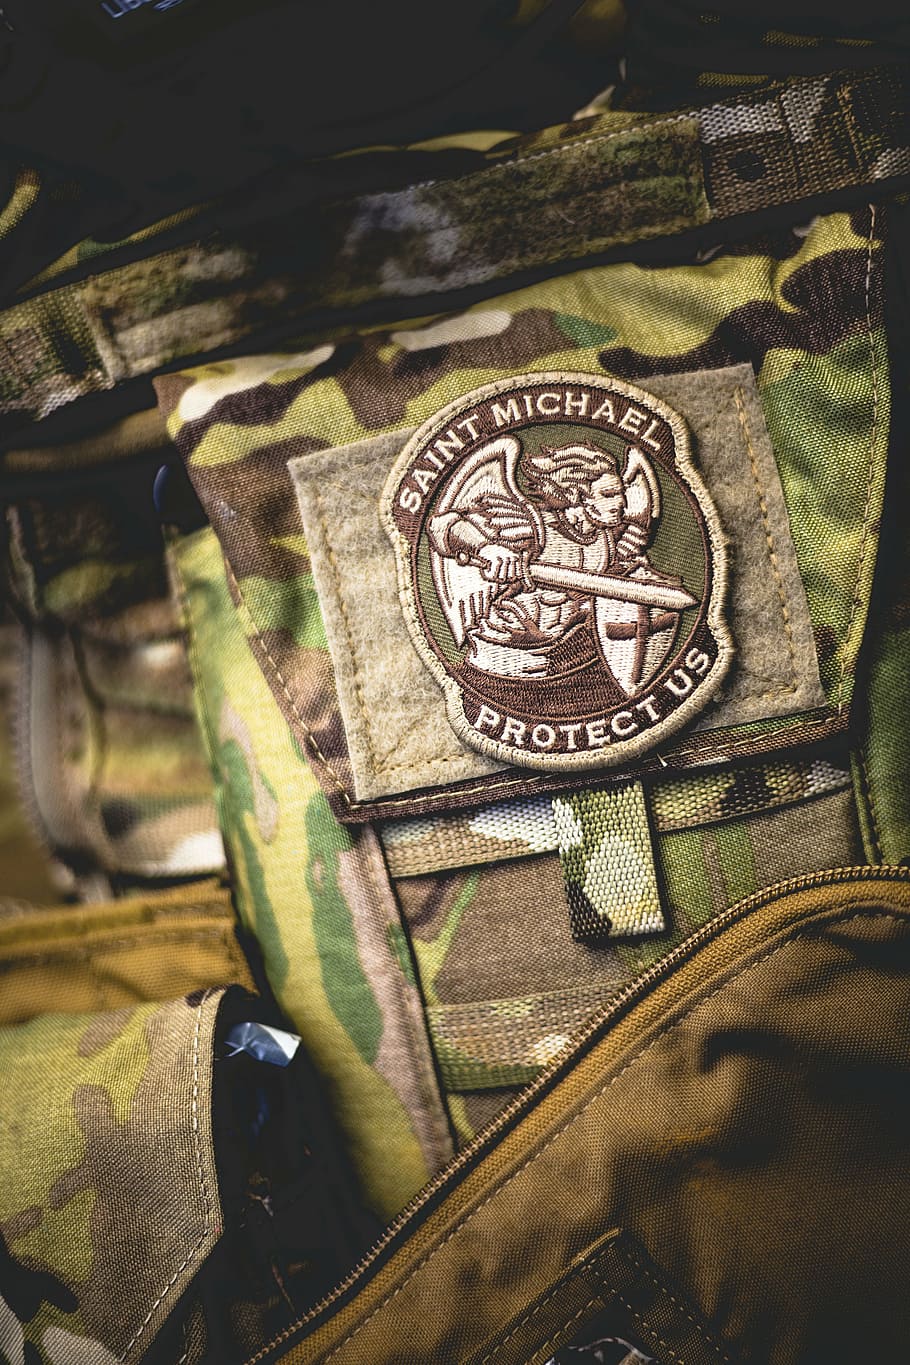 Saint Michael Protect Us patch insignia on green camouflage pants